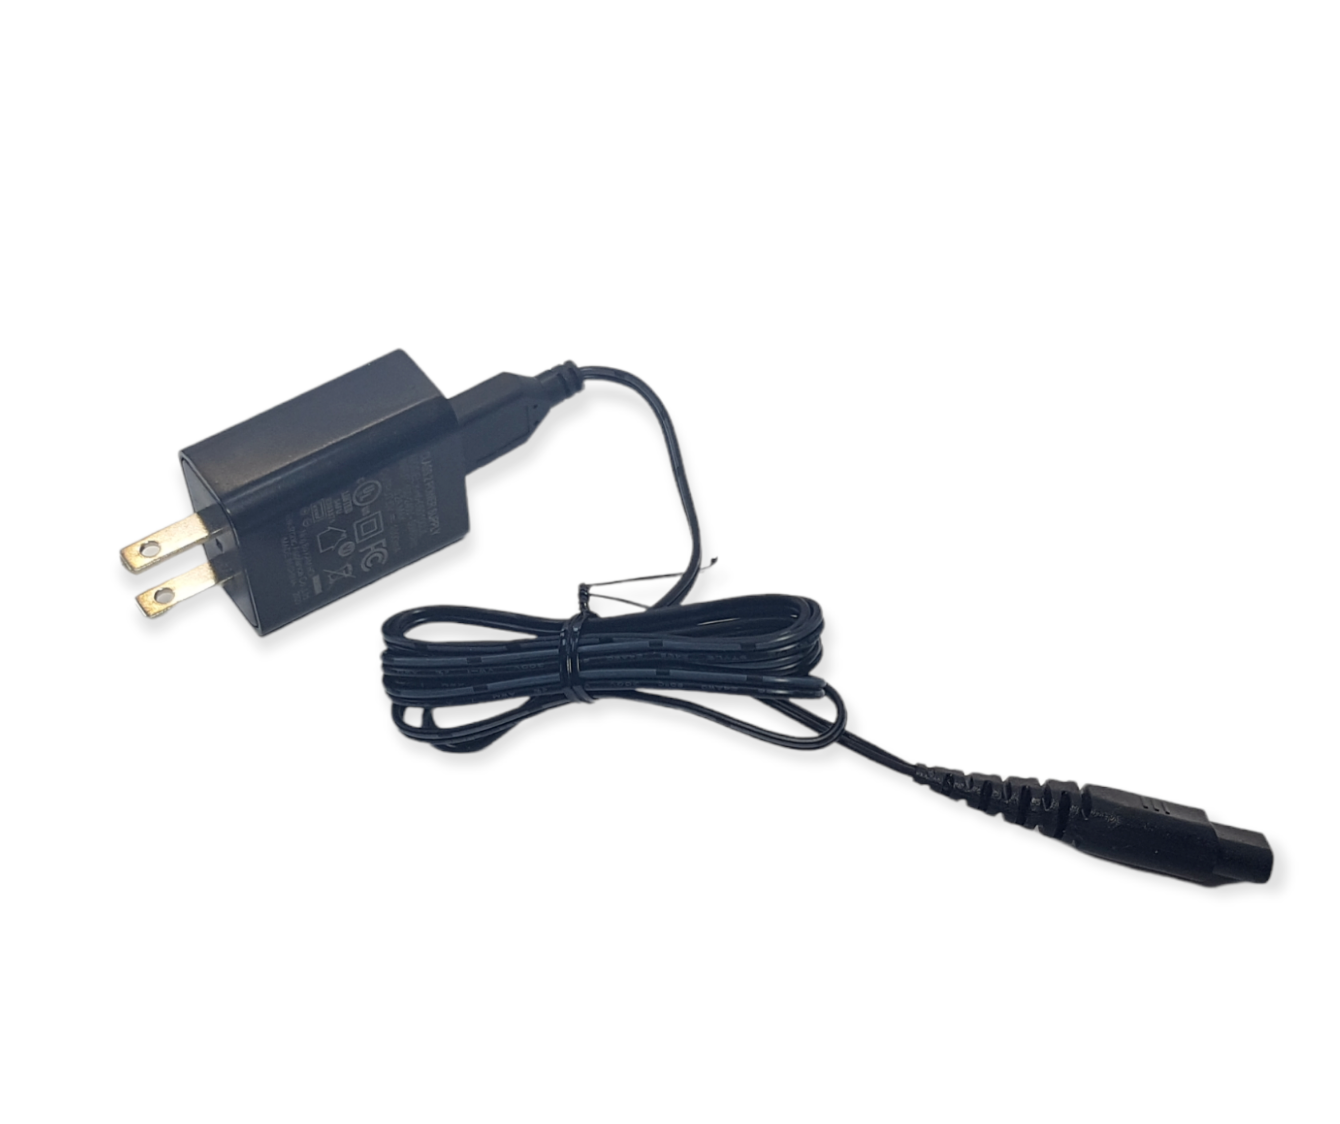 *Brand NEW* Genuine OEM HATTEKER Replacement Power Supply Cord 100-240V 5V 1000mA Dual Volt - Click Image to Close